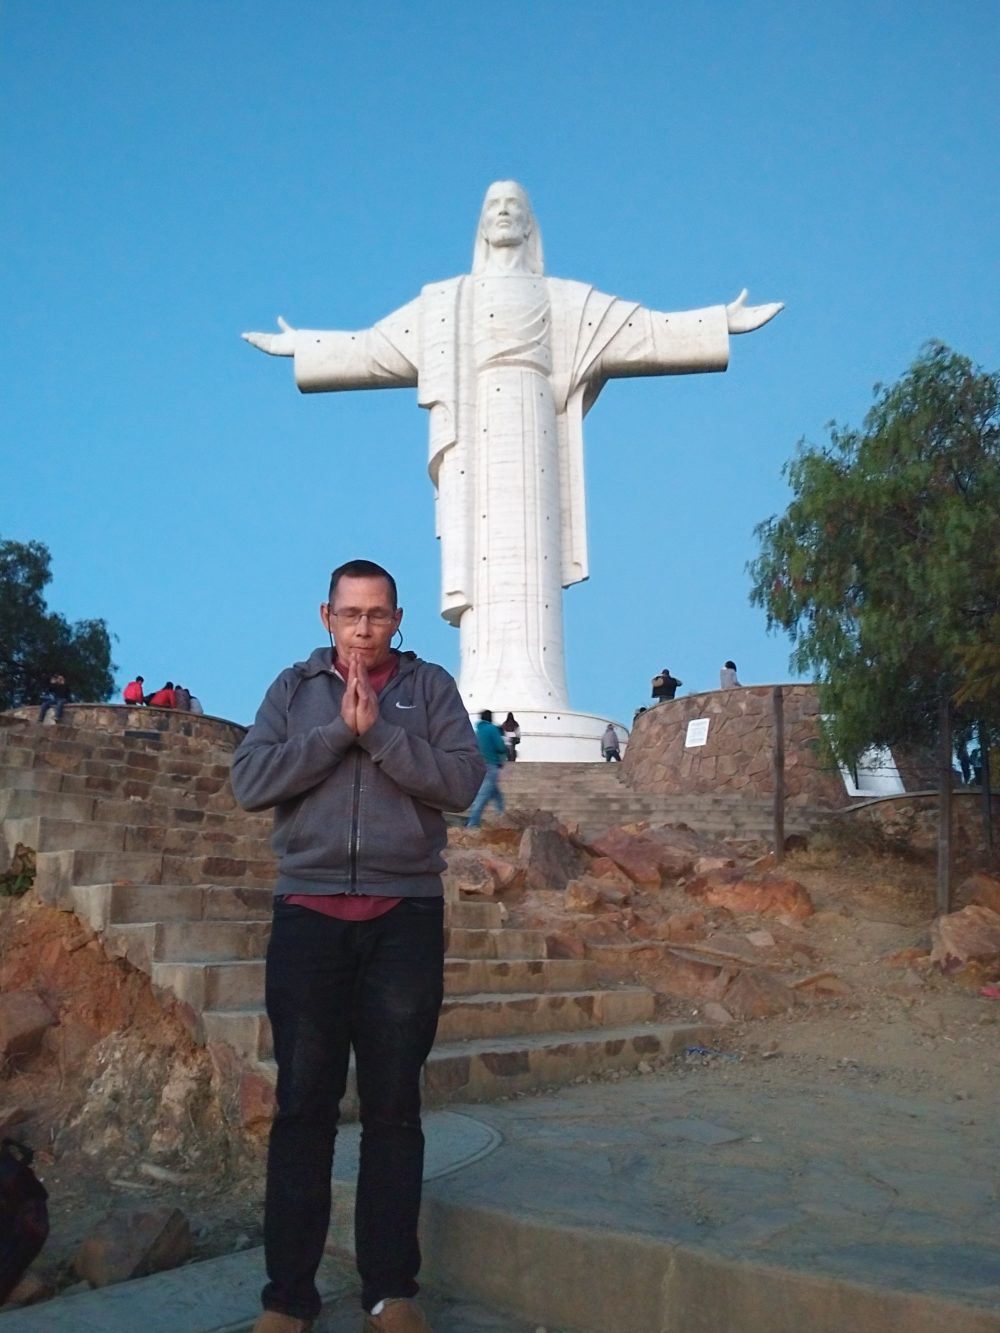 This picture was taken July 8, 2018 in Cochabamba, Bolivia. This is the tallest statue of Jesus in the world. When building it the deliberately made it 6 inches taller than the very famous one in Rio de Janeiro, Brazil.